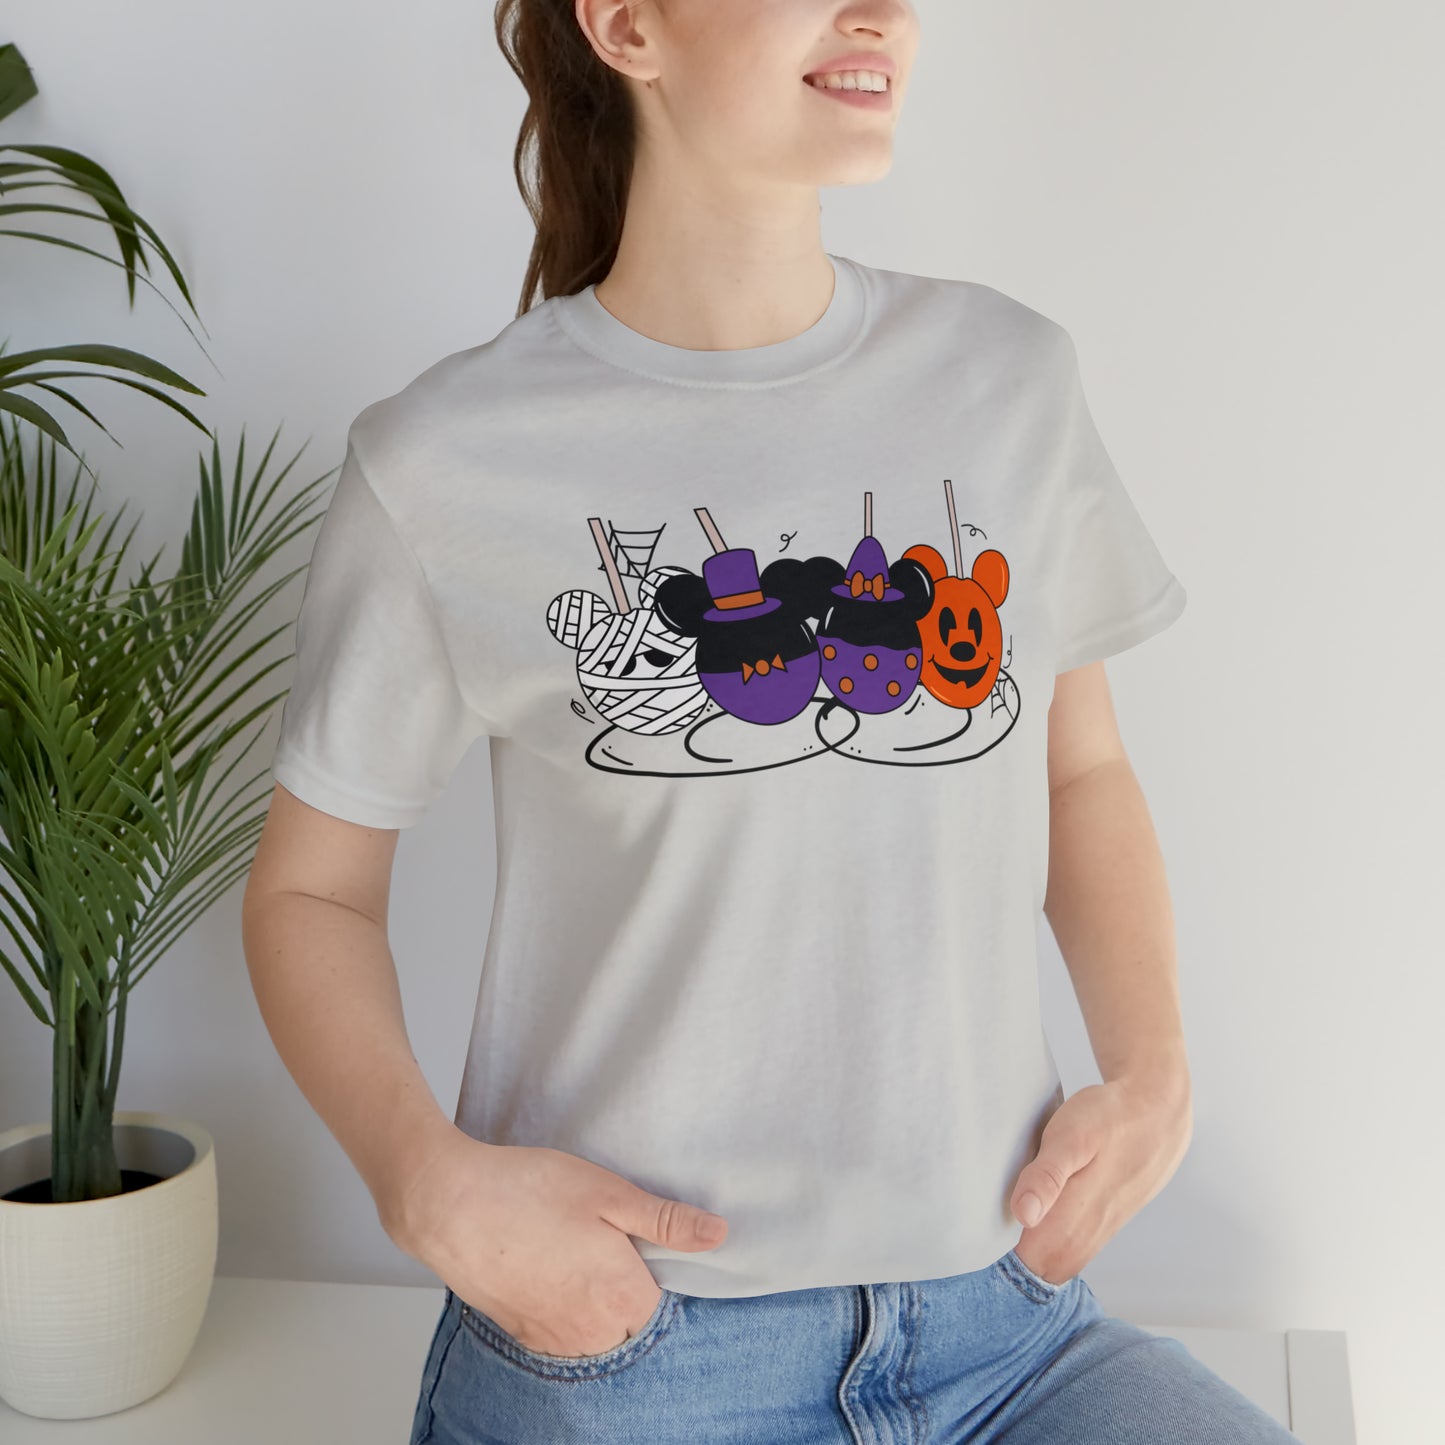 Adult Candy Apples Tee - Bella + Canvas